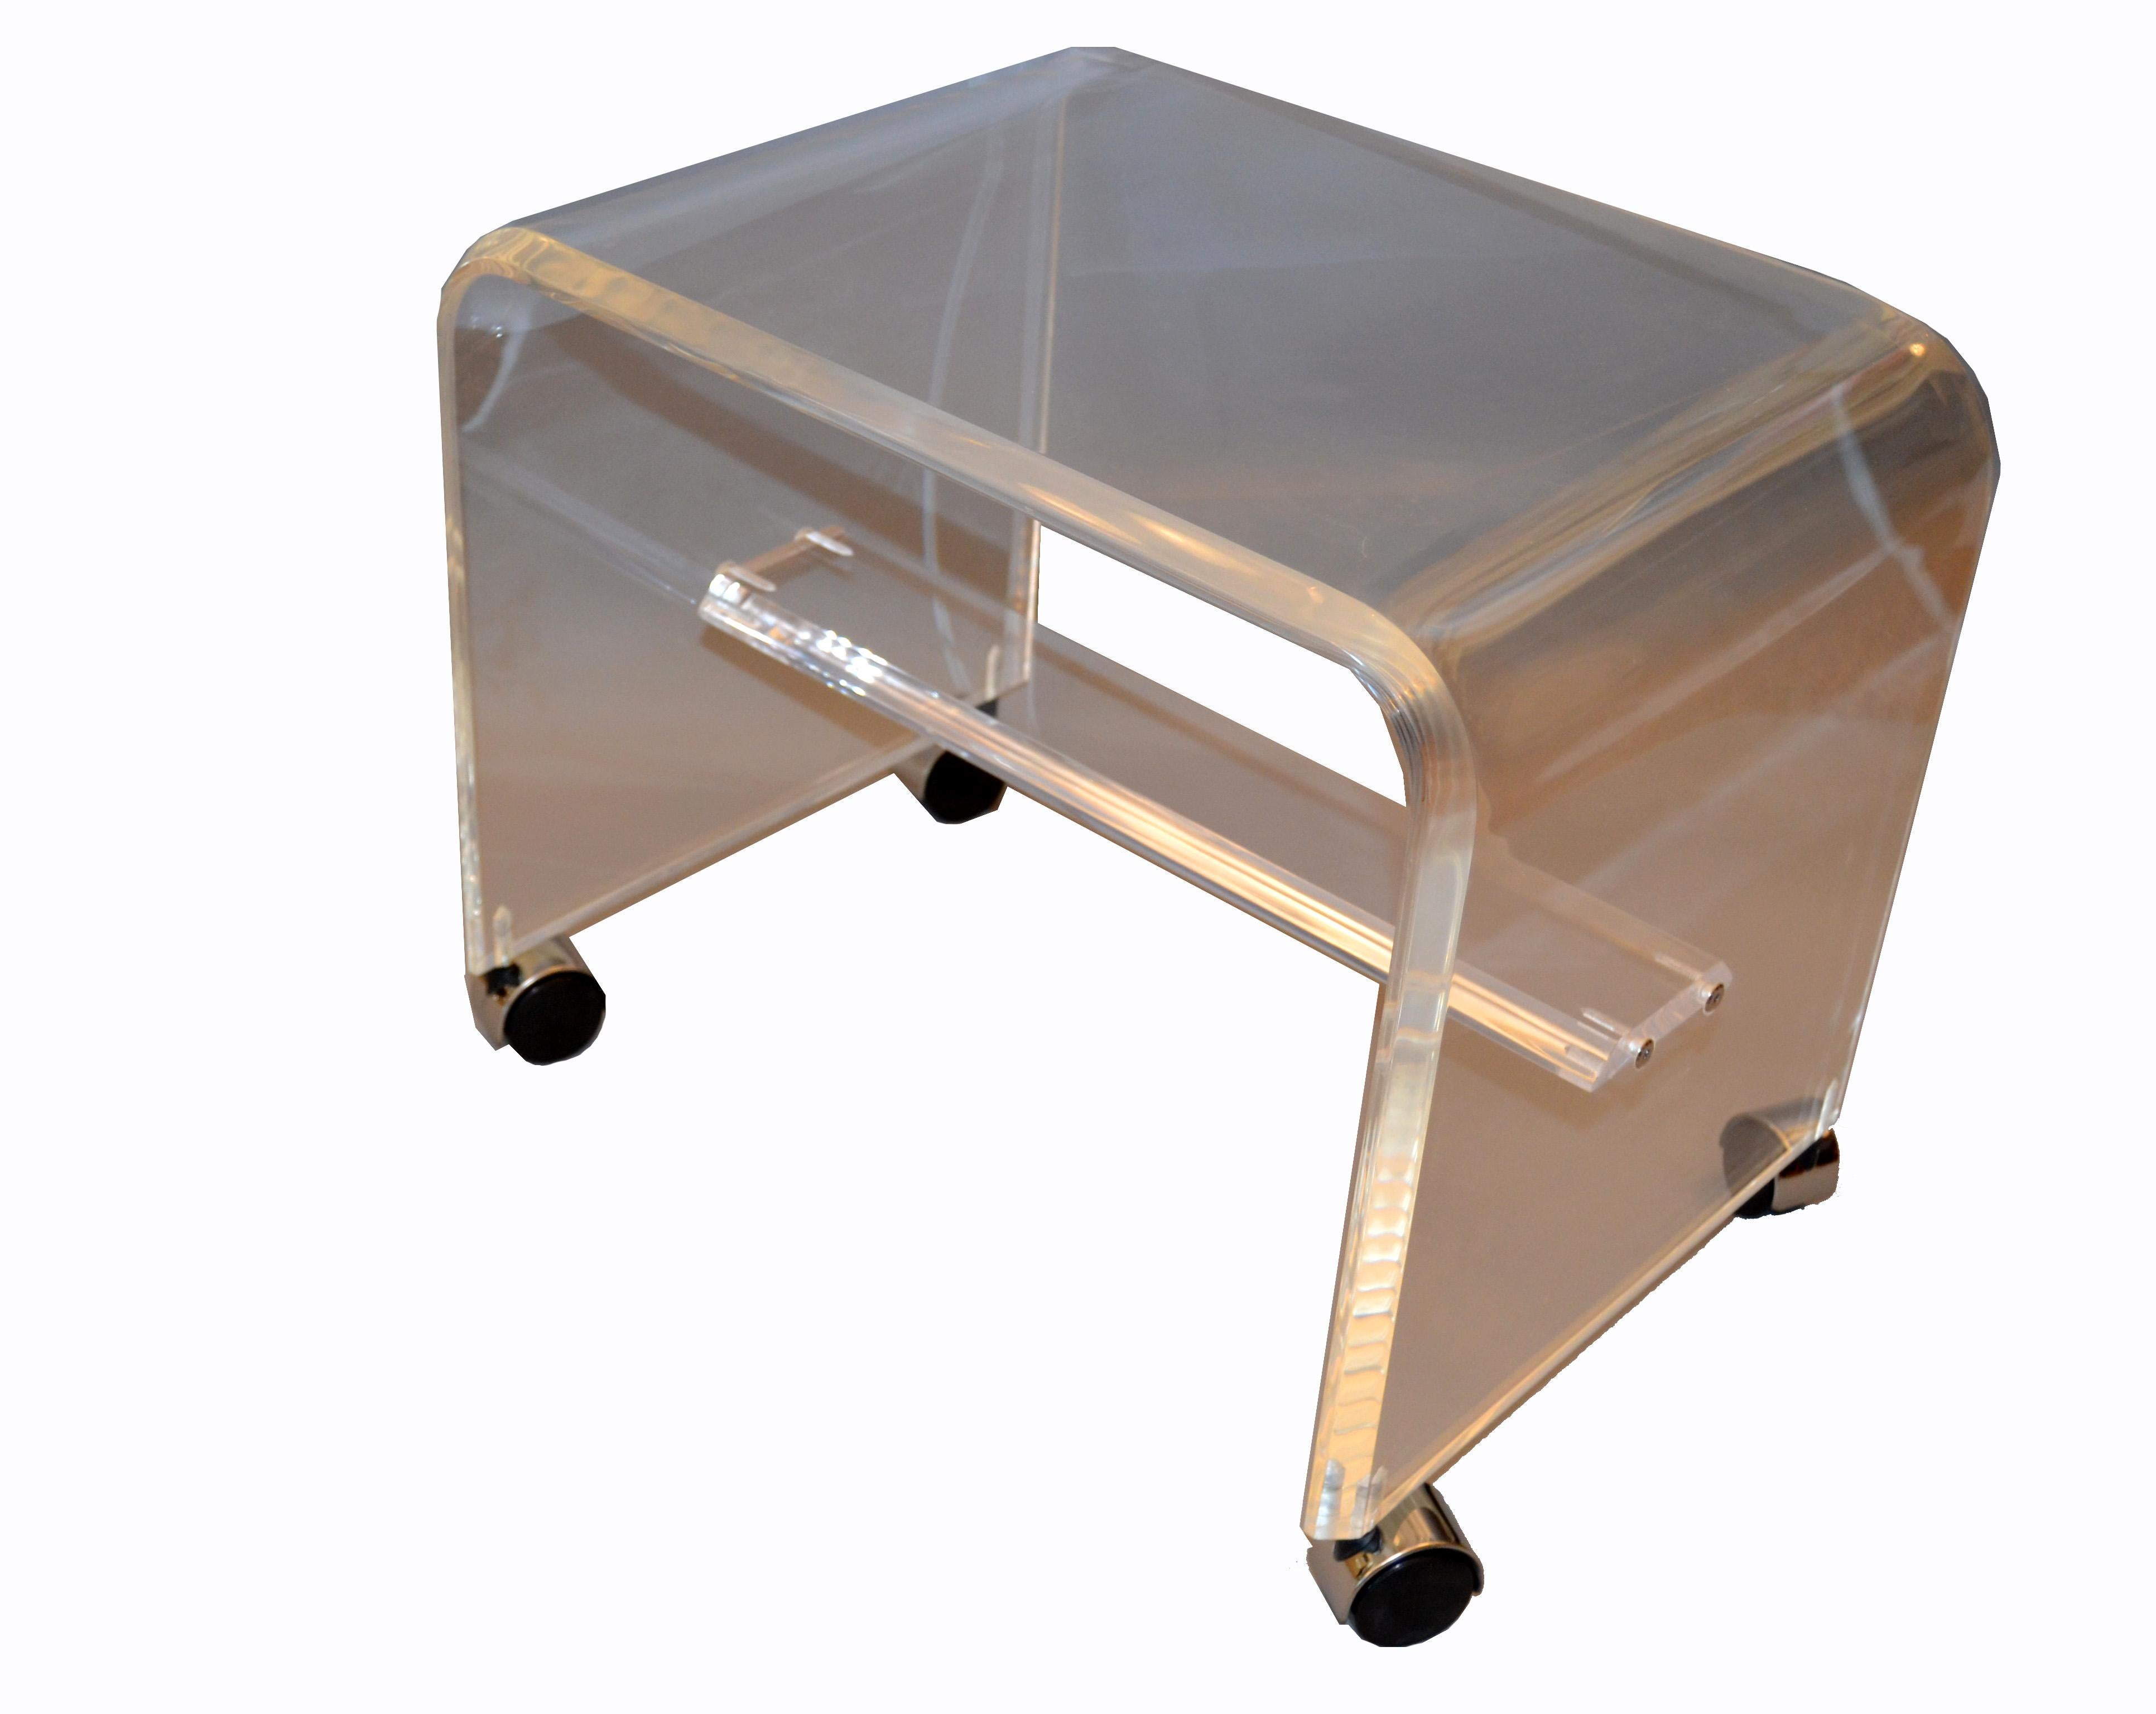 American Mid-Century Modern Lucite or Acrylic Stool, Vanity Stool on Chrome Casters